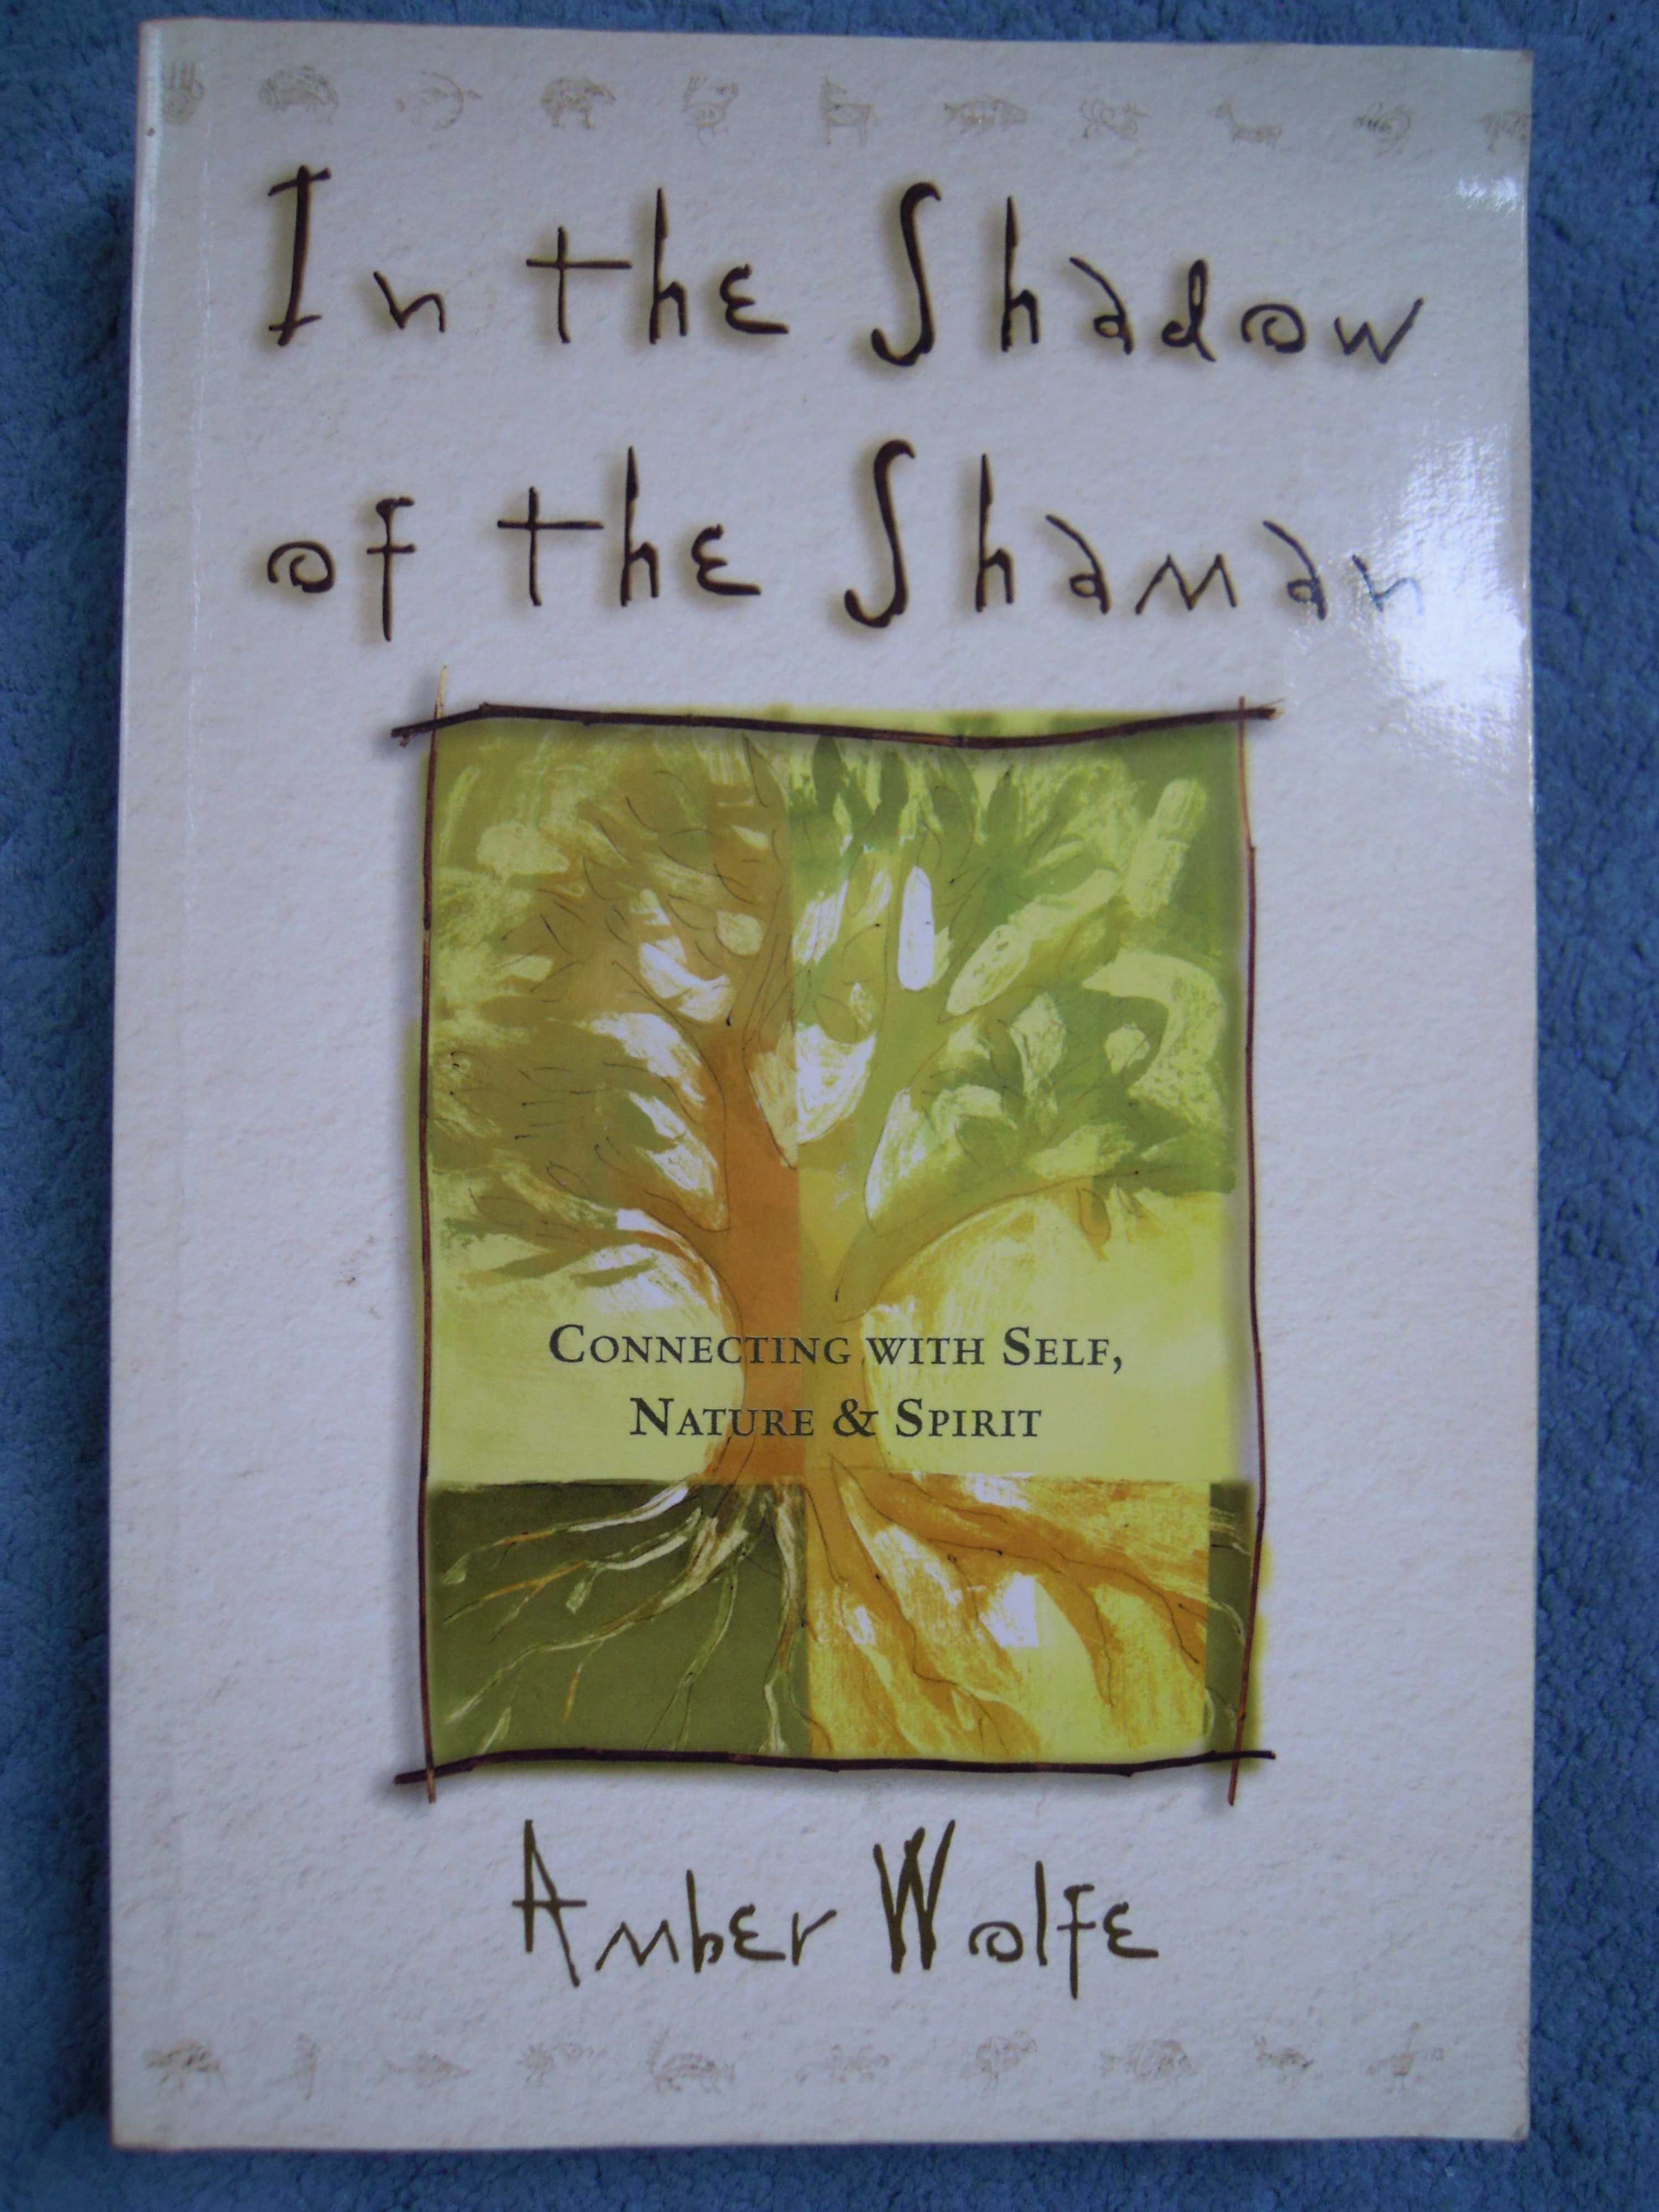 "In the Shadow of the Shaman" Amber Wolf